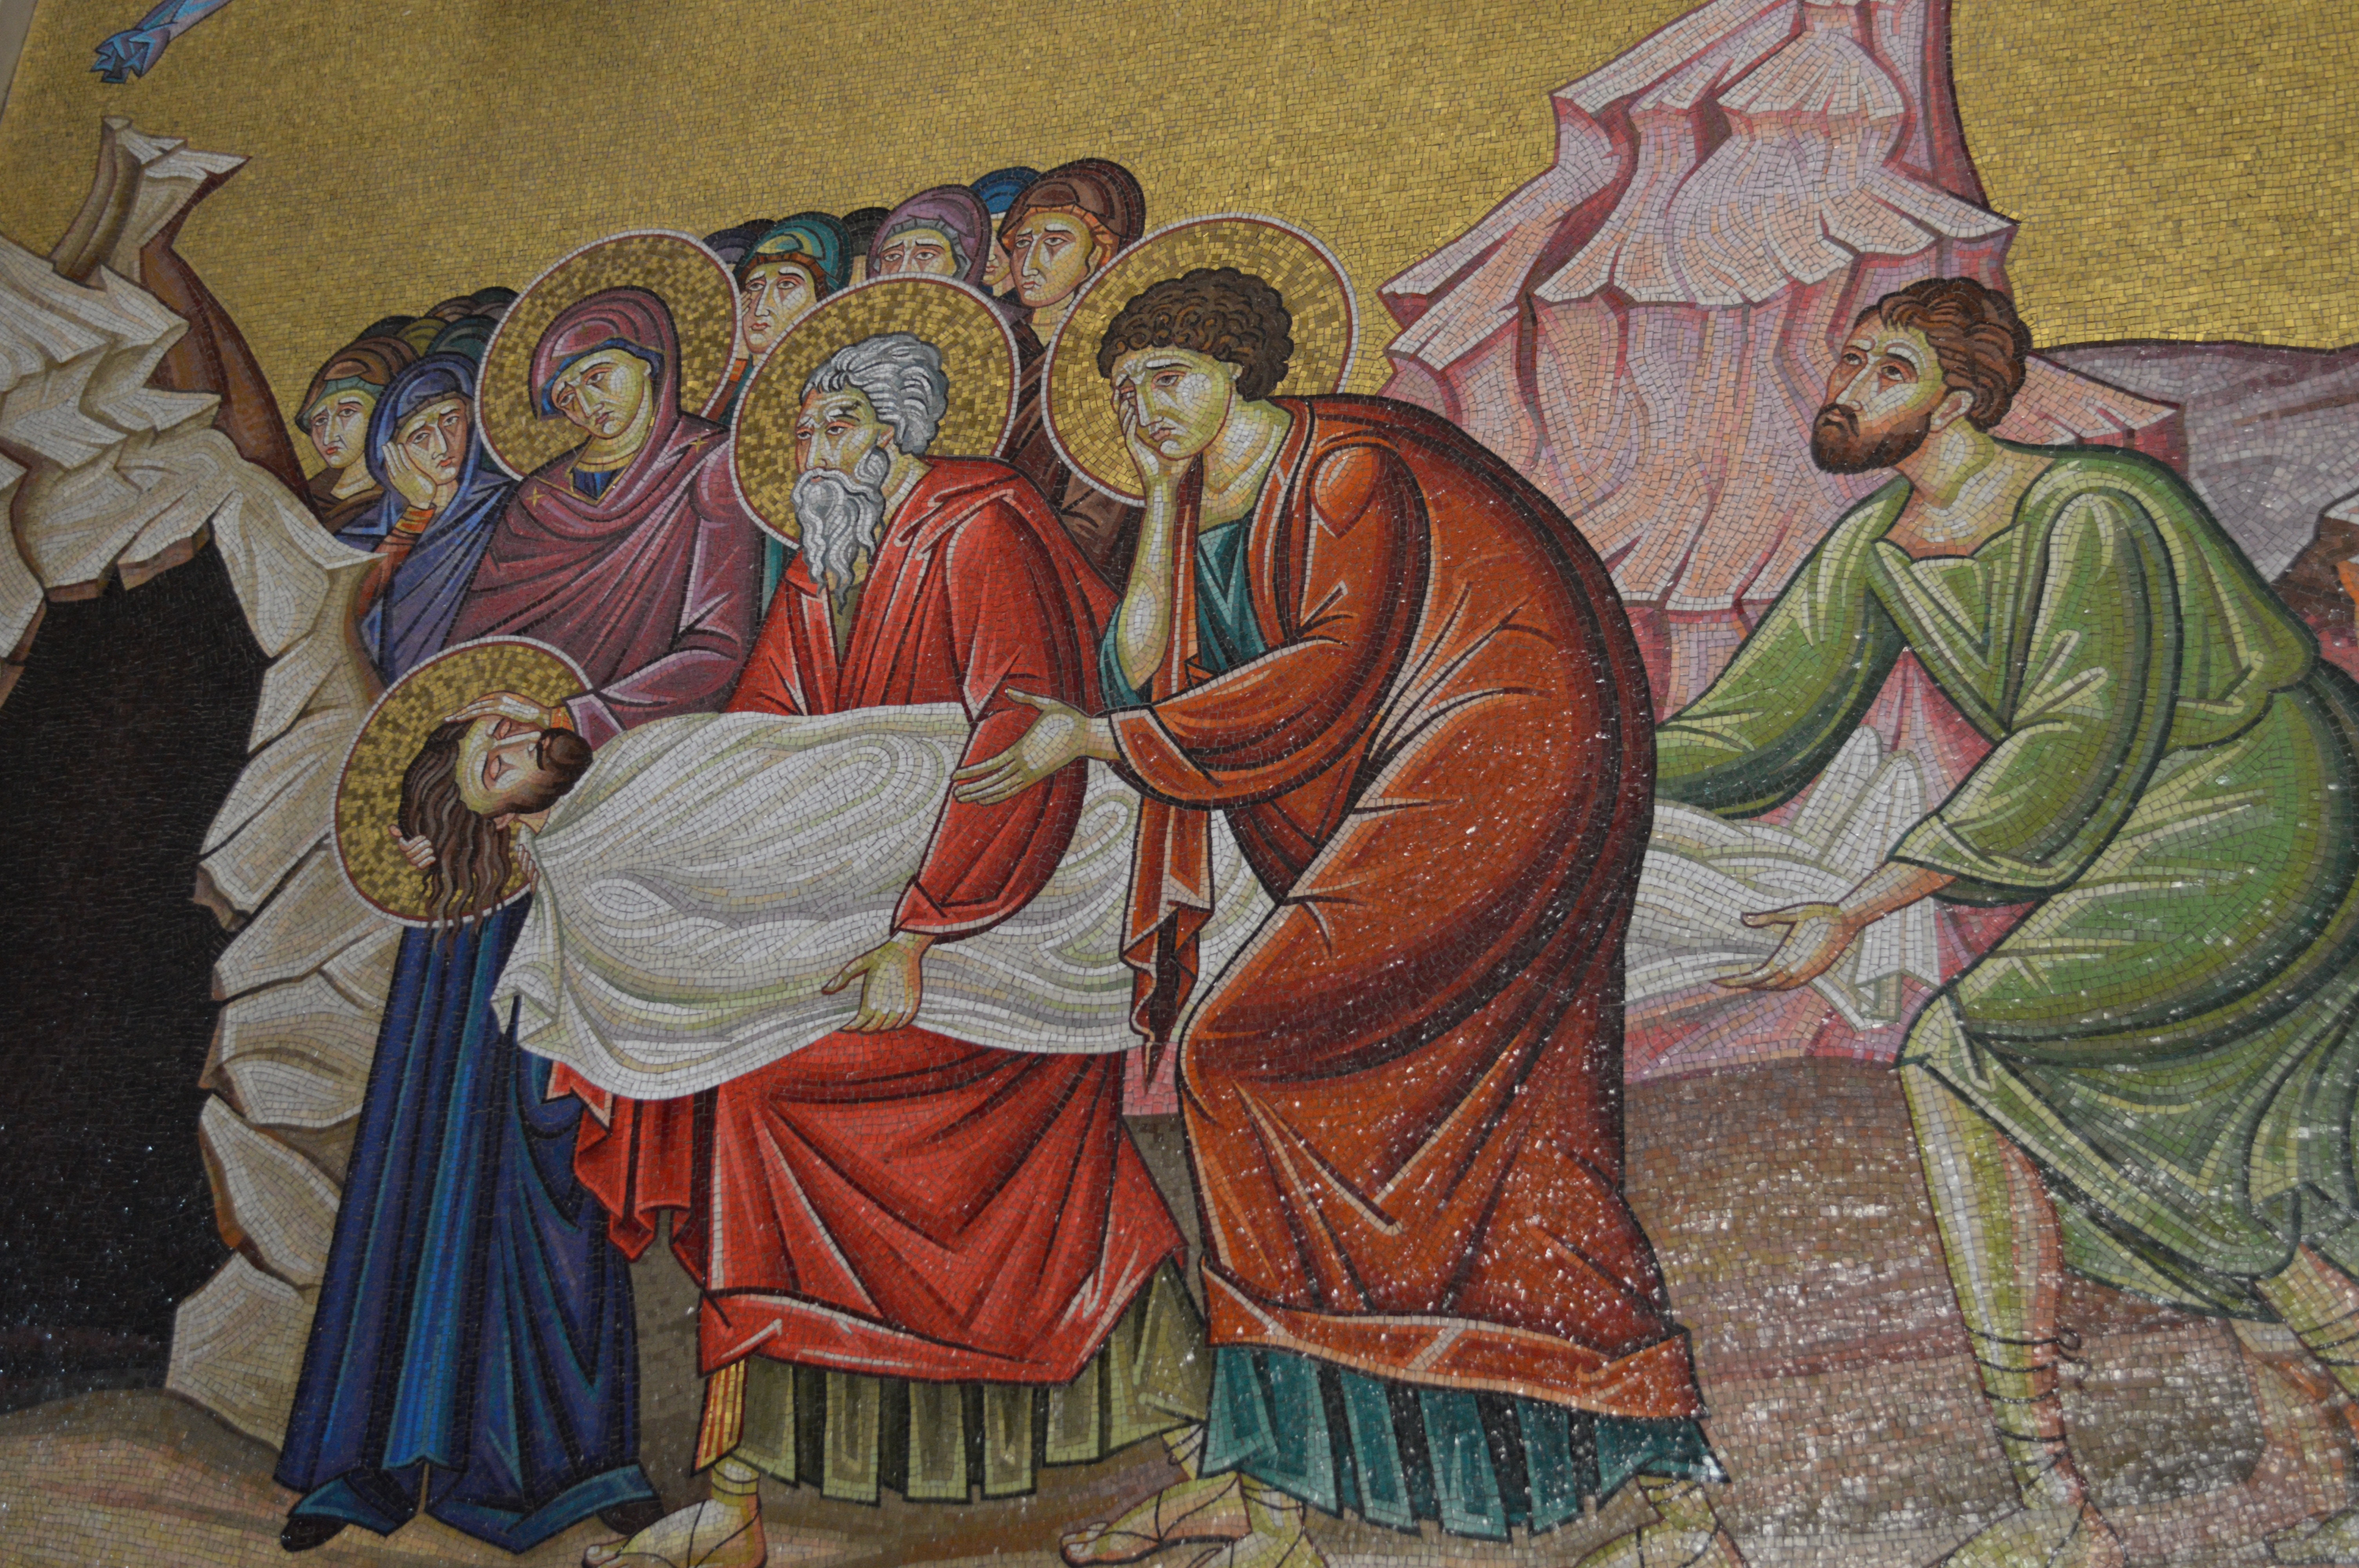 died Jesus carried by His apostles and Mama Mary